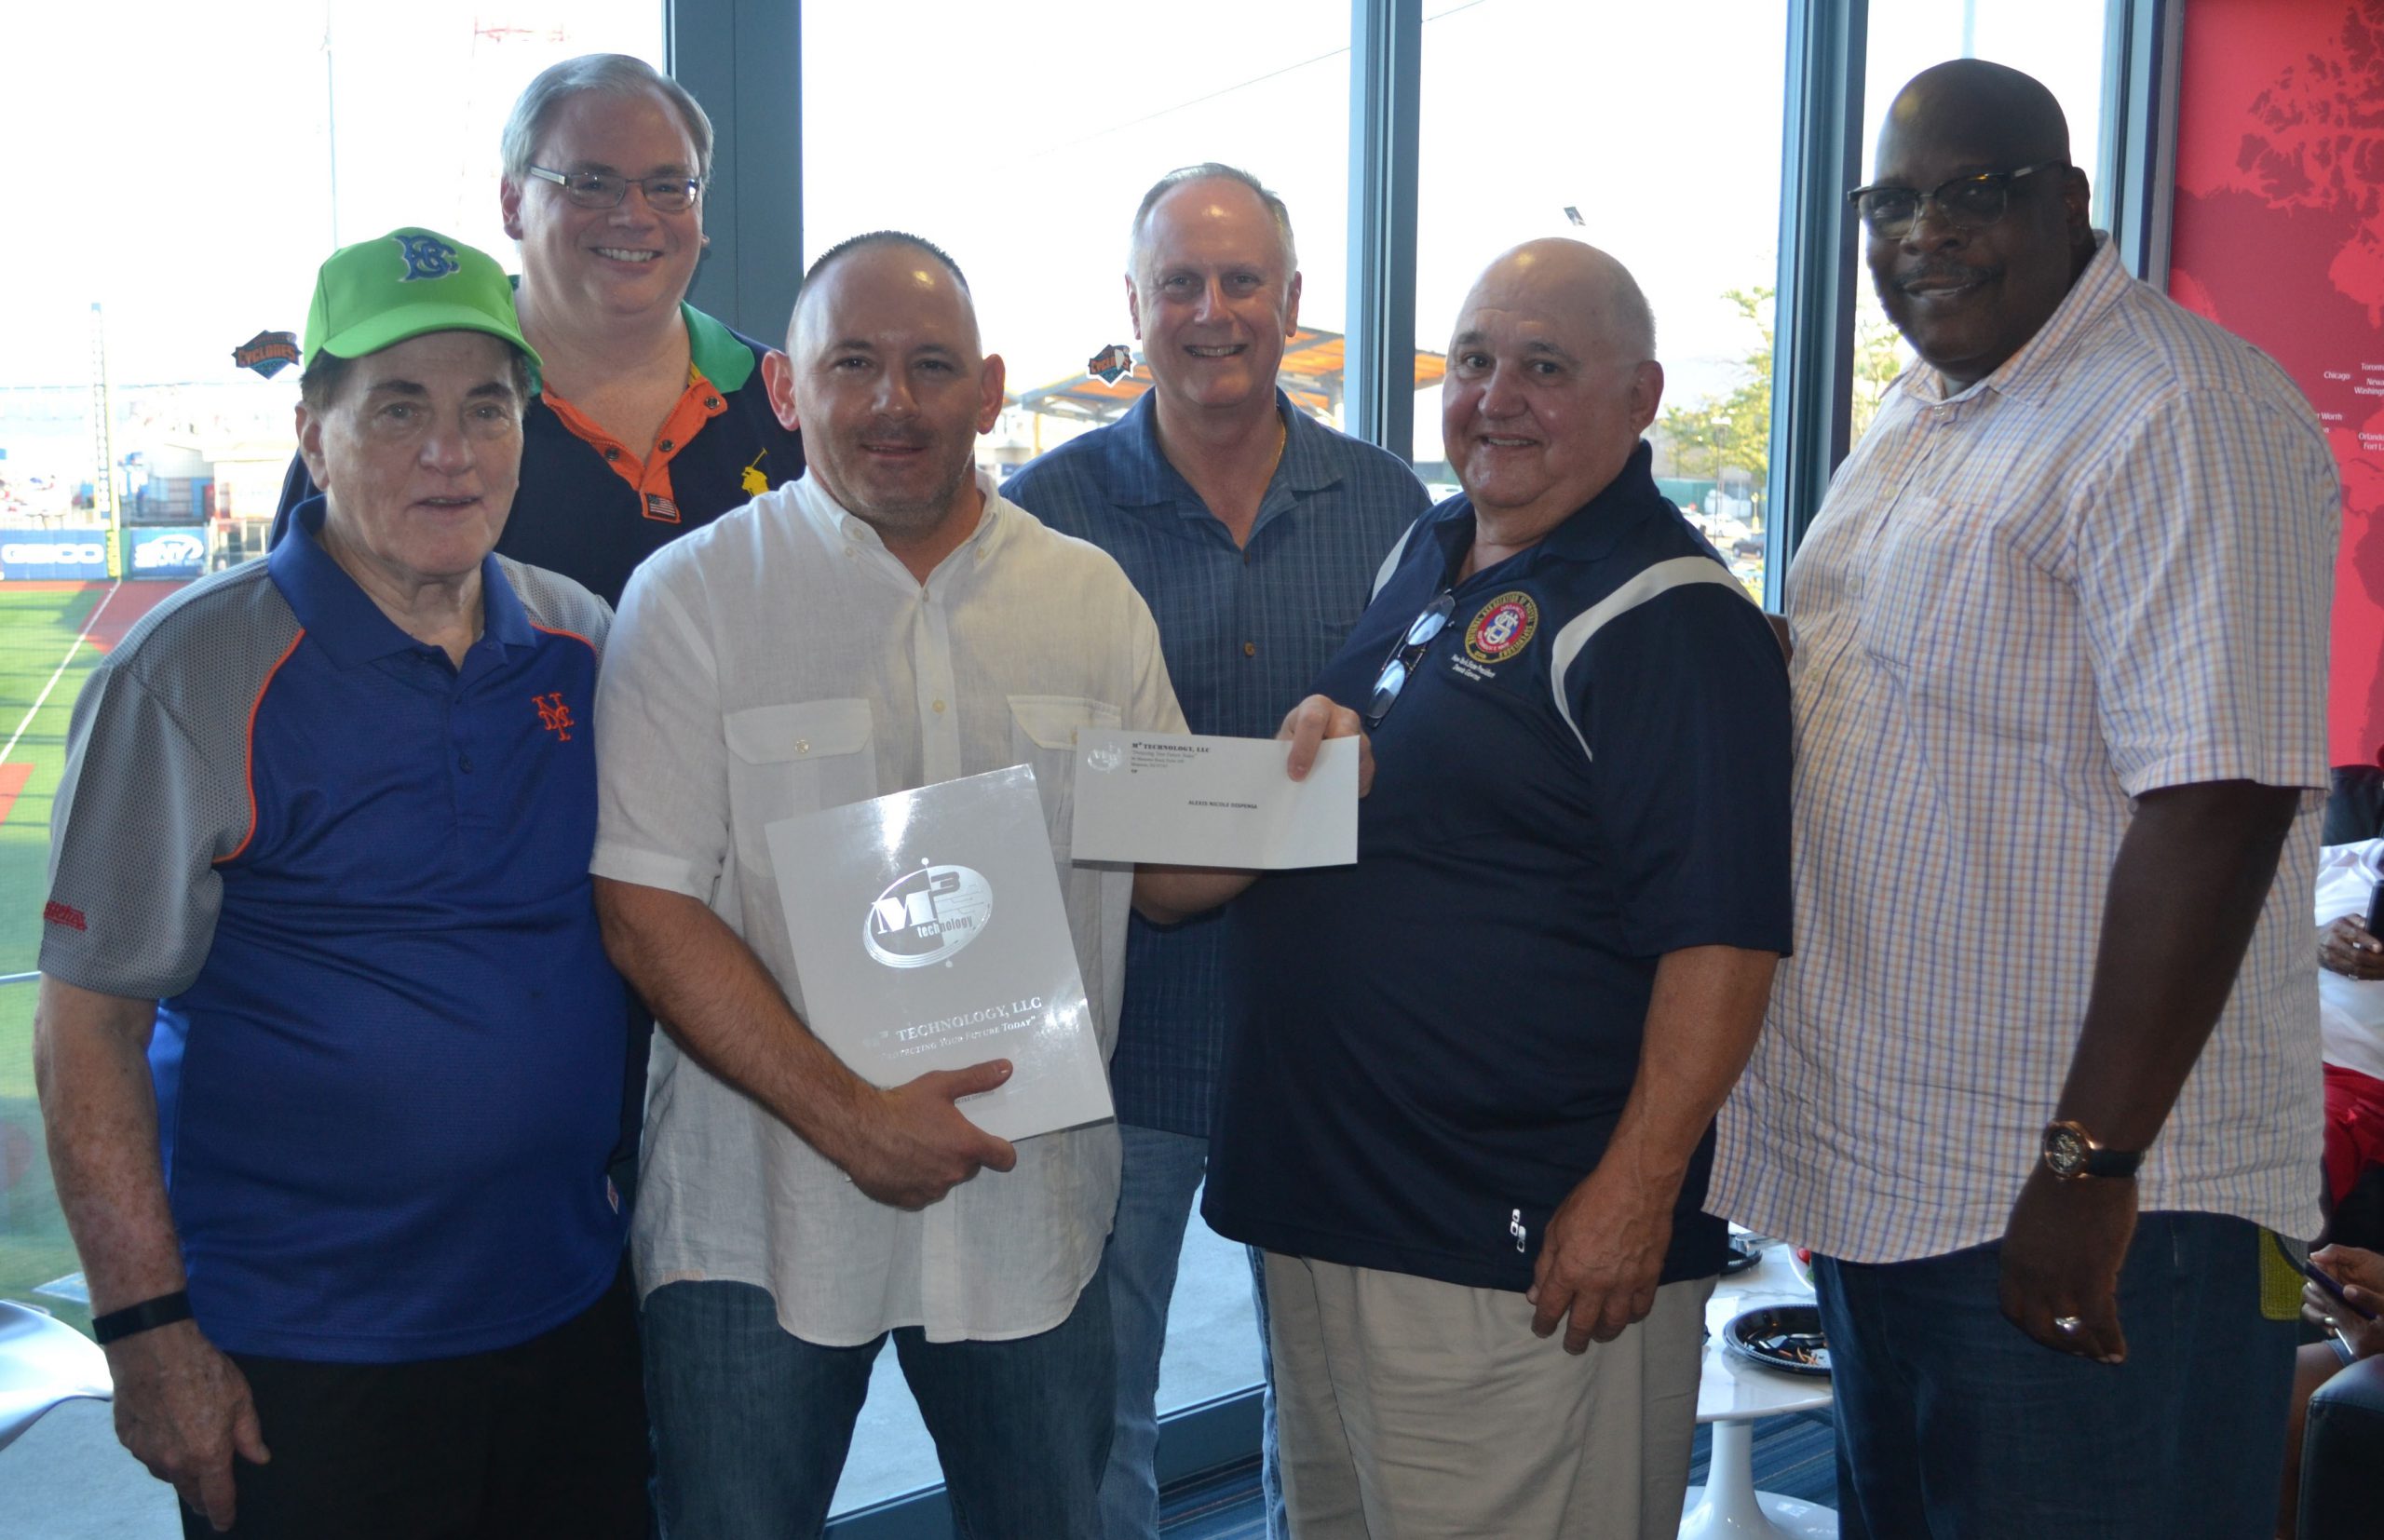 N.Y.S. President Dennis Gawron, second from the right, Presenting M3 Technology Scholarship Award to Father of Nicole Dispensa, Joe Dispensa at Presidents Meeting held at Brooklyn Cyclone Stadium on July 7, 2017